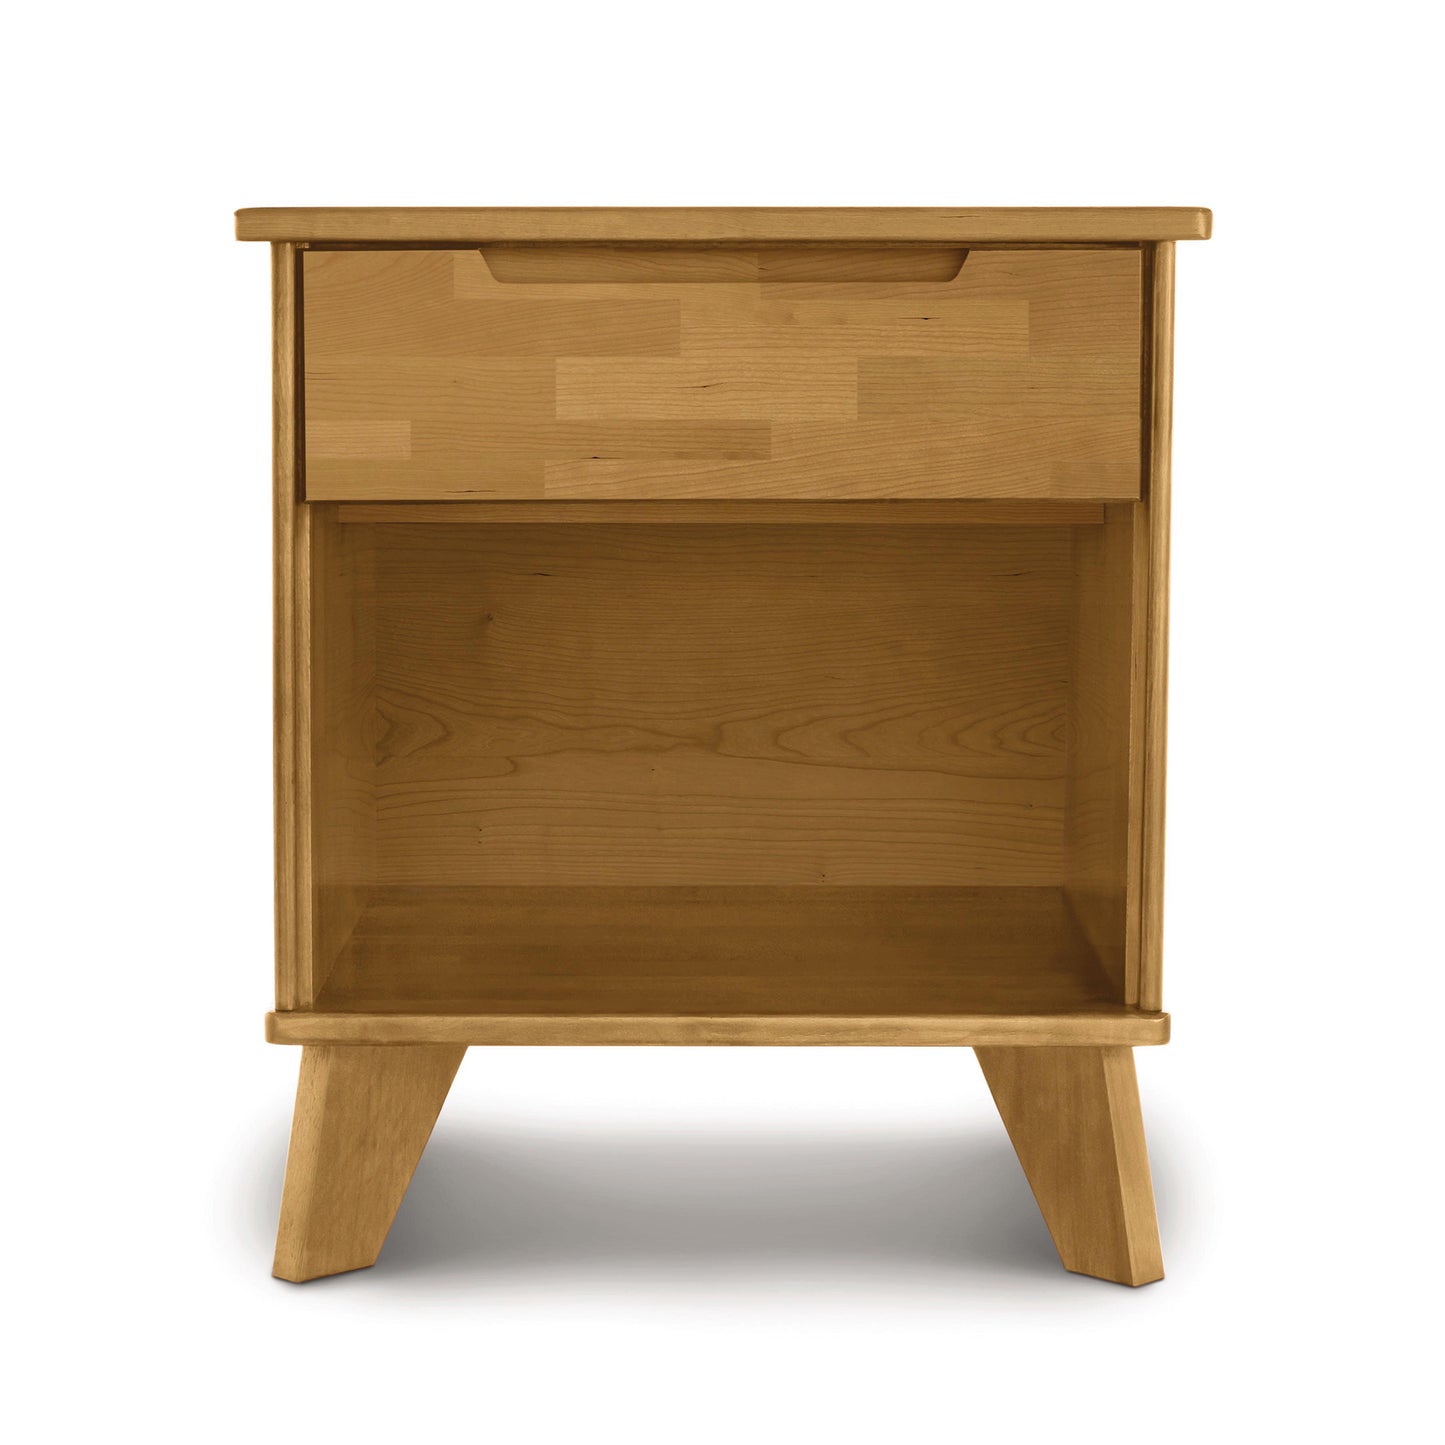 A sustainable Linn 1-Drawer Enclosed Shelf Nightstand by Copeland Furniture.